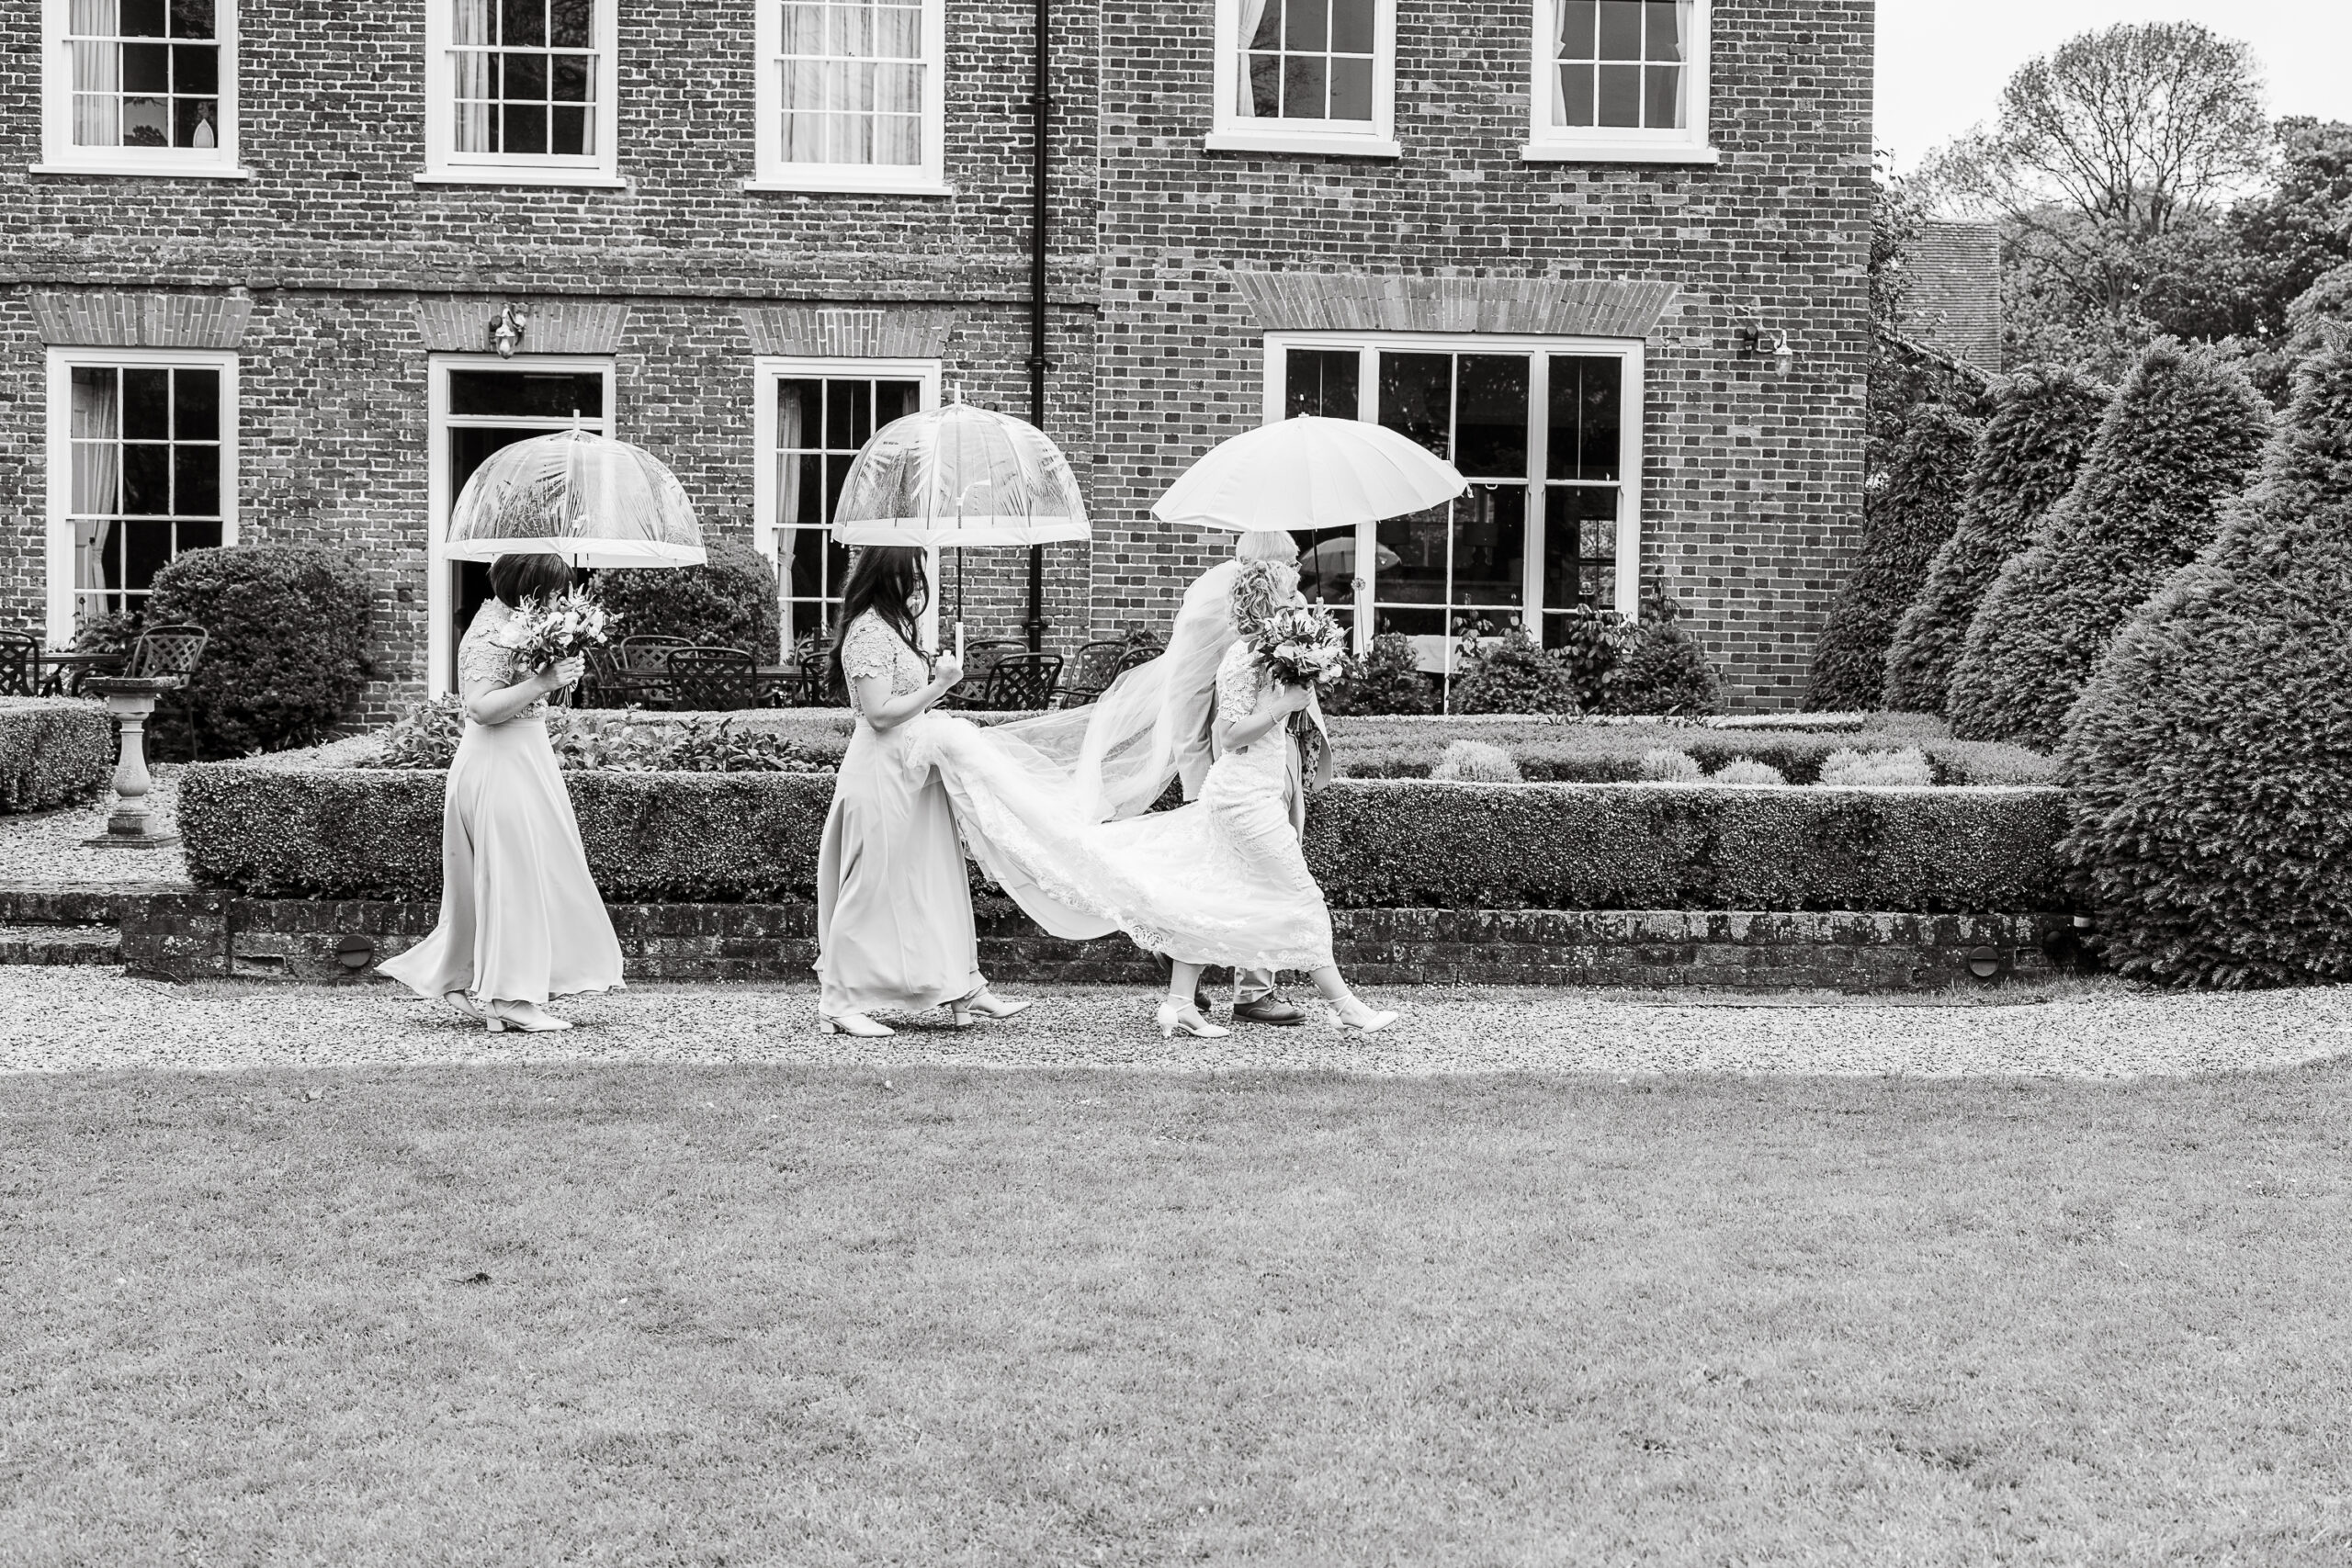 A black-and-white photo shows three bridesmaids and a bride walking in front of a large brick building. The bridesmaids carry flower bouquets and each holds a clear umbrella while one helps lift the bride's dress train as they move forward.